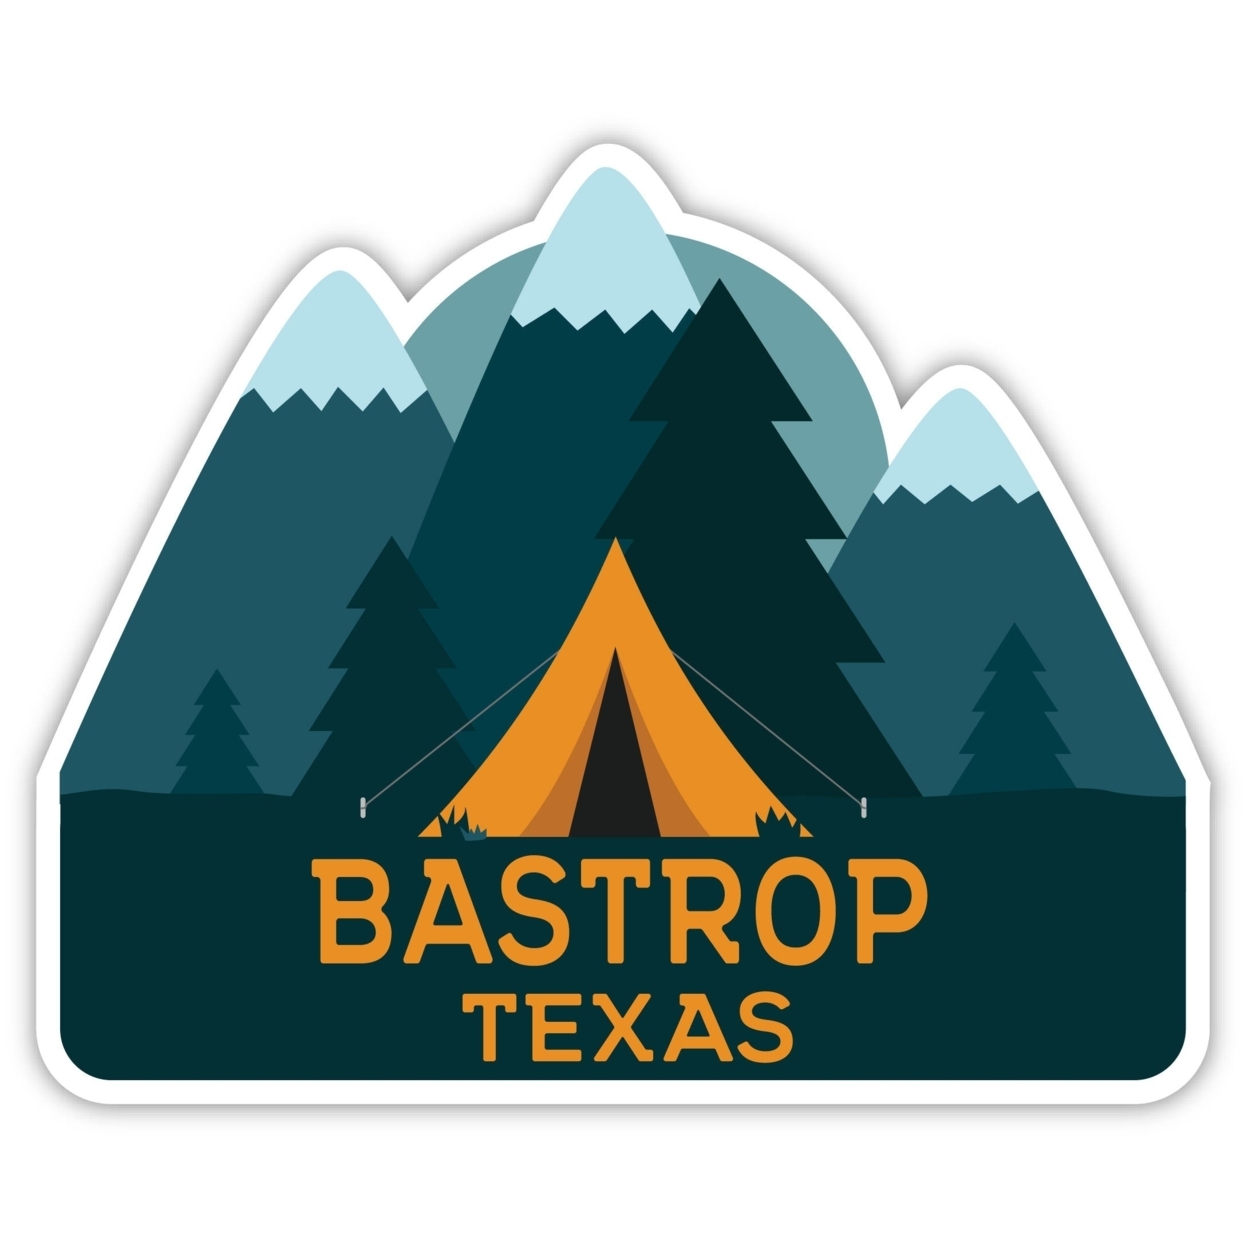 Bastrop Texas Souvenir Decorative Stickers (Choose Theme And Size) - 4-Pack, 8-Inch, Camp Life